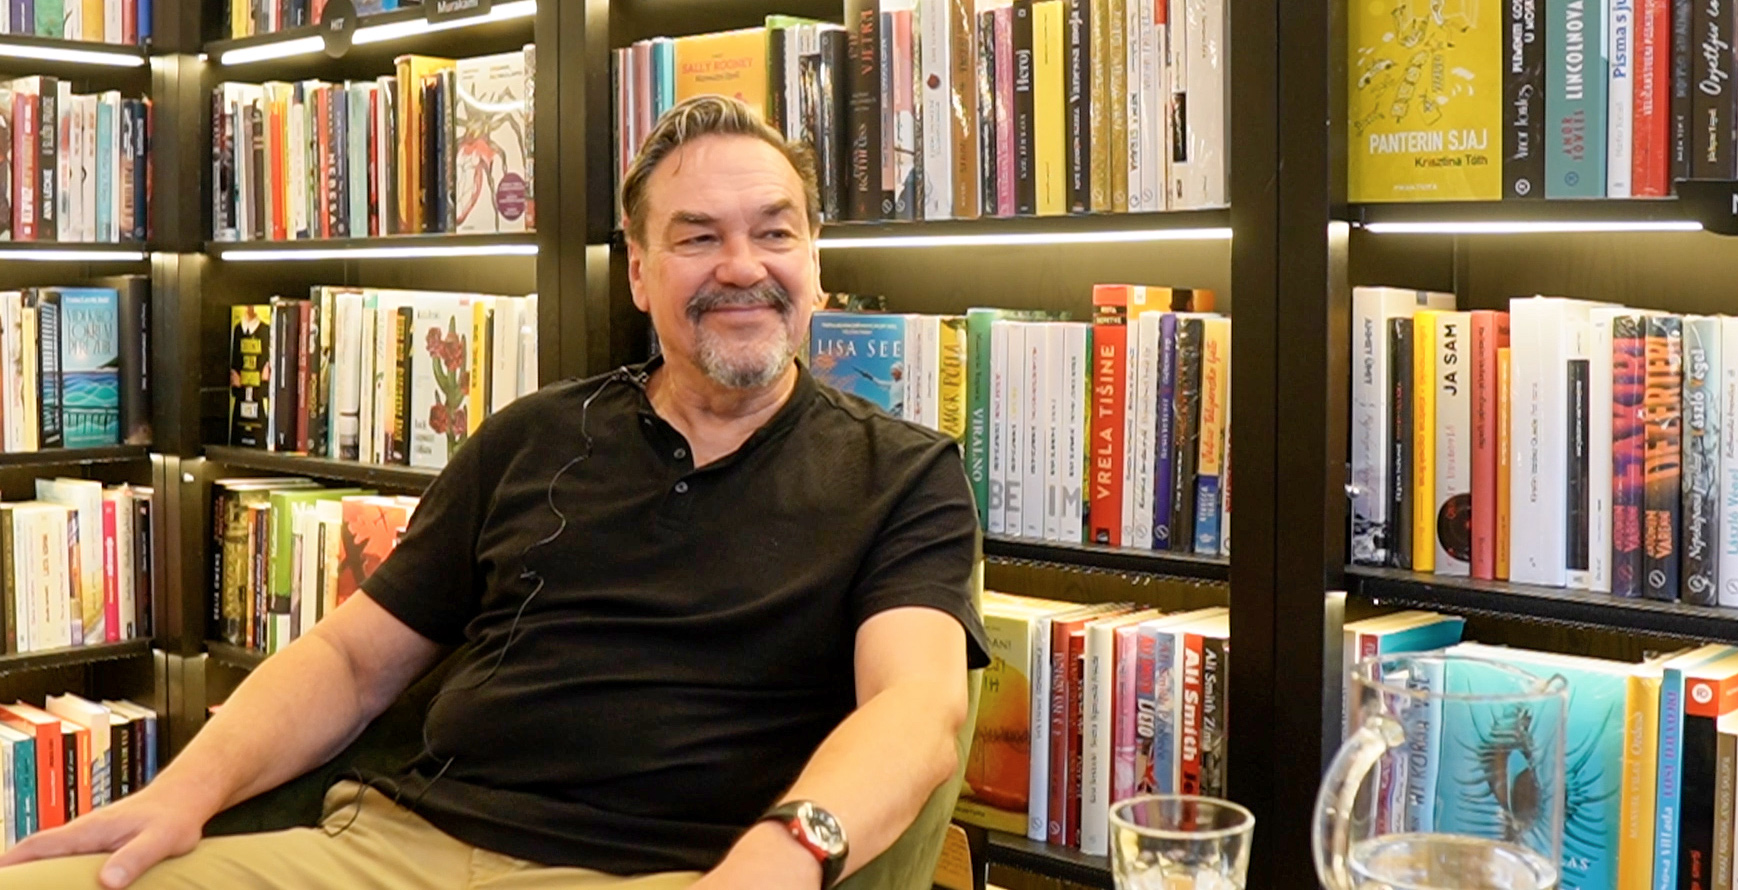 Yuri Andrukhovych at at the Fraktura bookstore in Zagreb, Croatia.